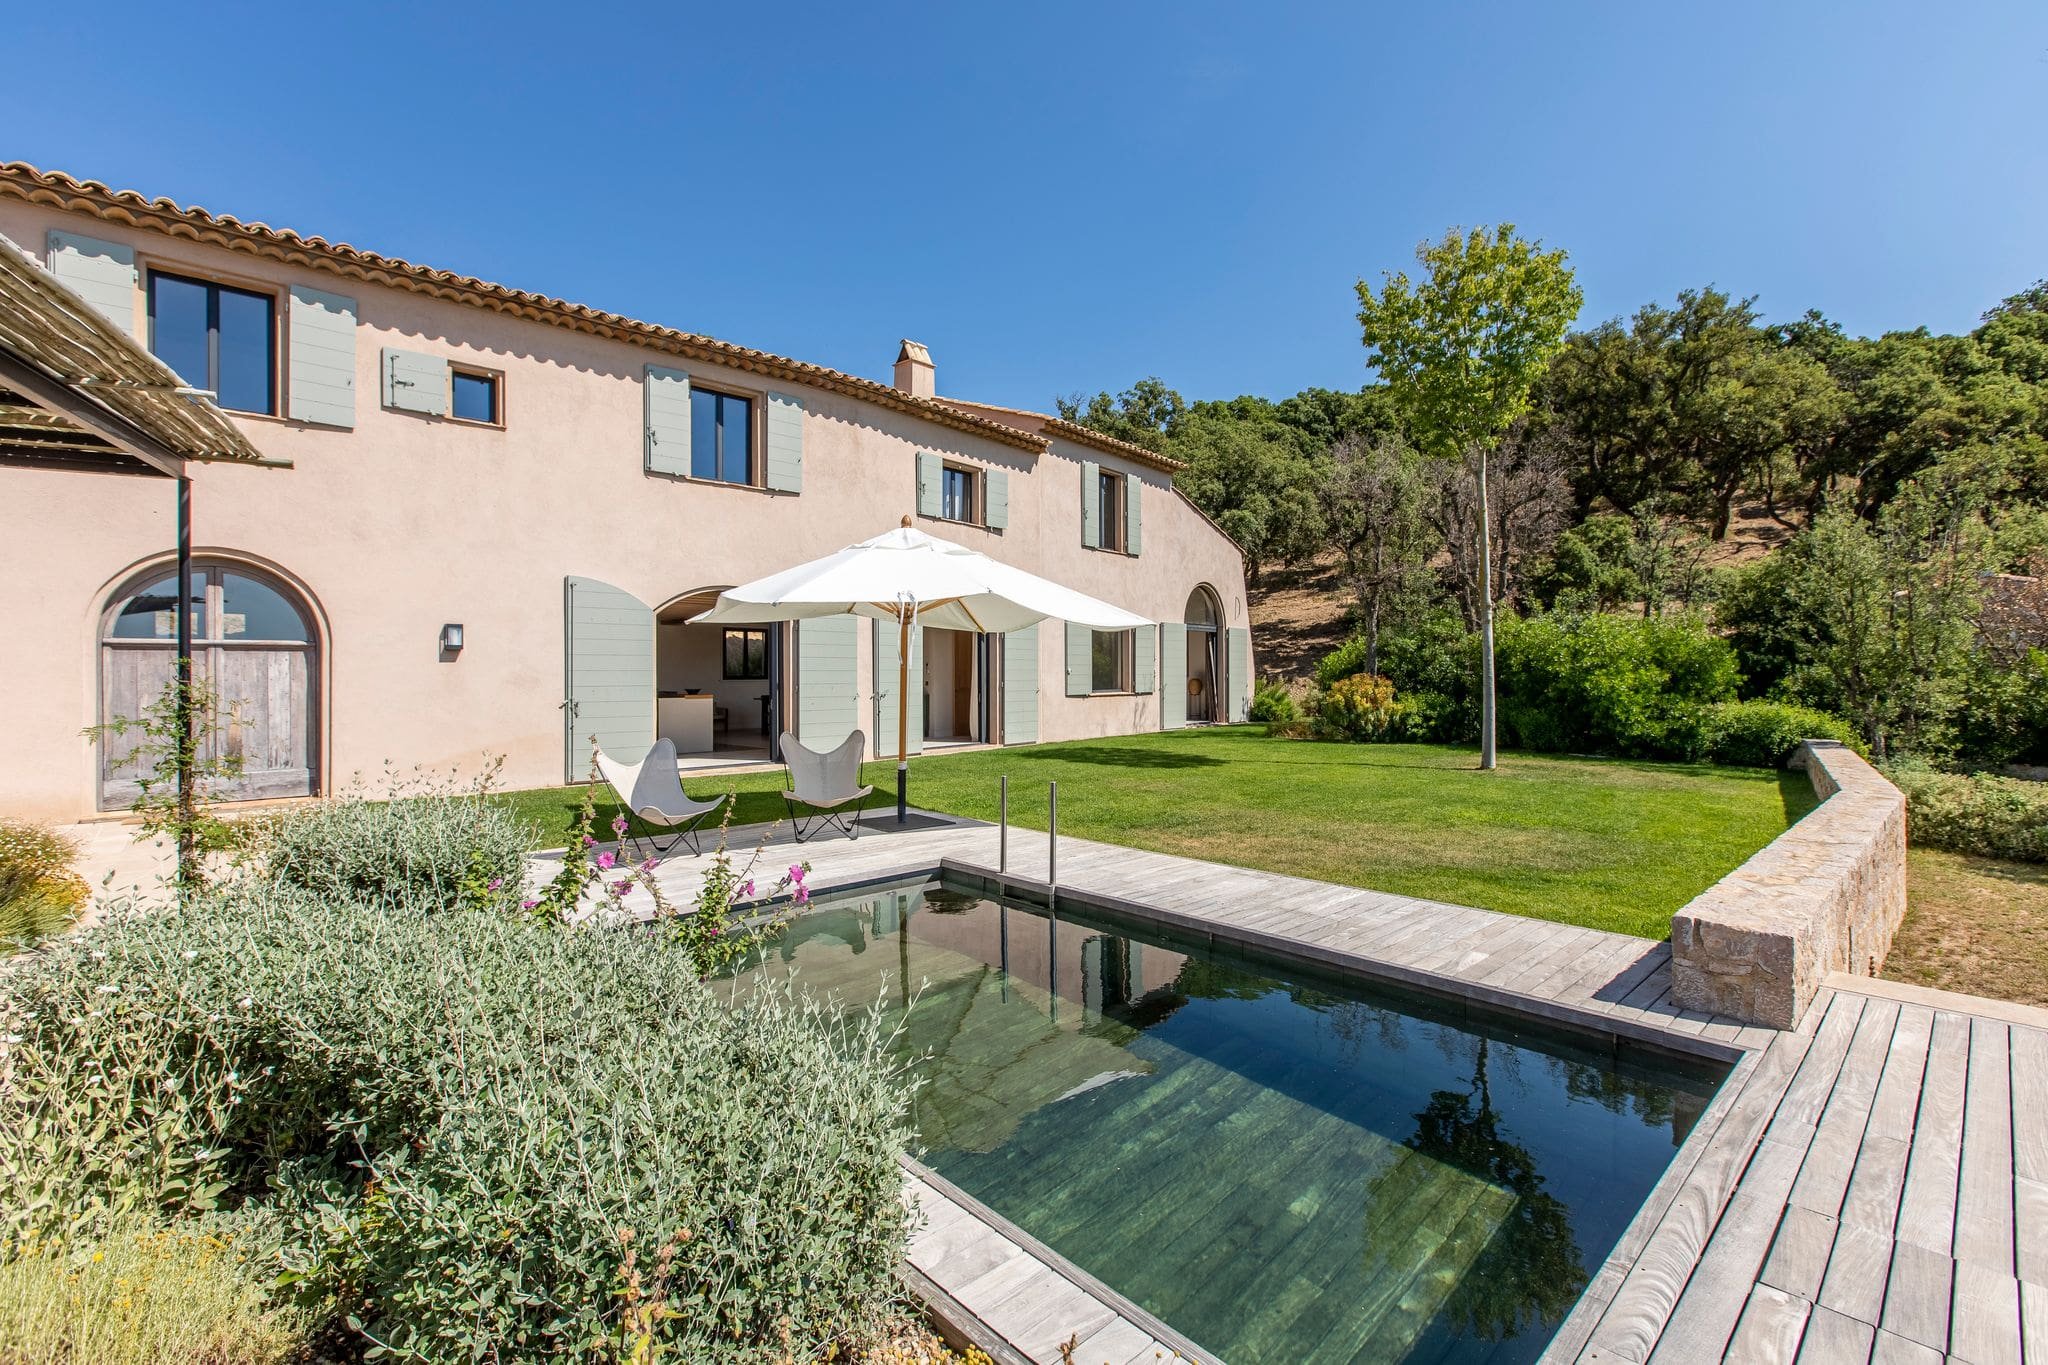 Luxury villa Golfe de St Tropez to rent with sea view and swimming pool cote d'azur